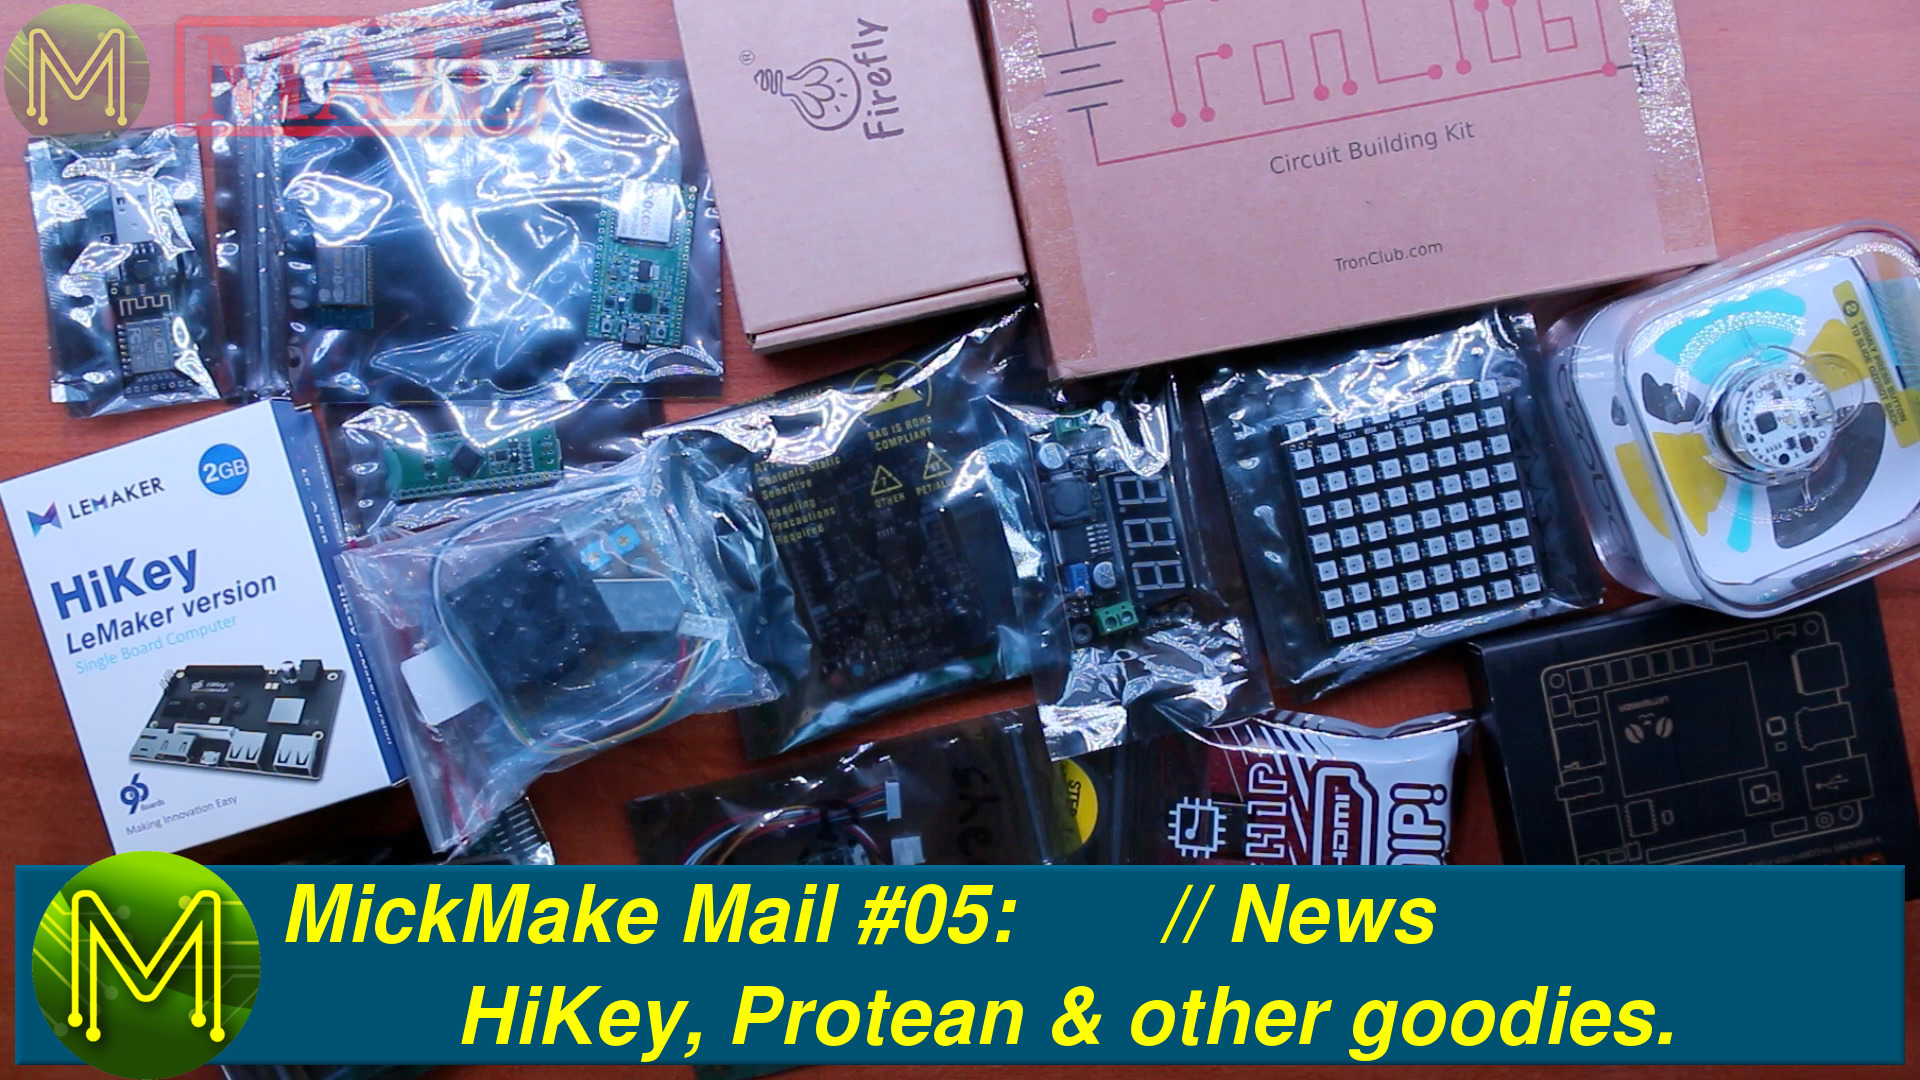 MickMake Mail #05: HiKey, Protean & other goodies.